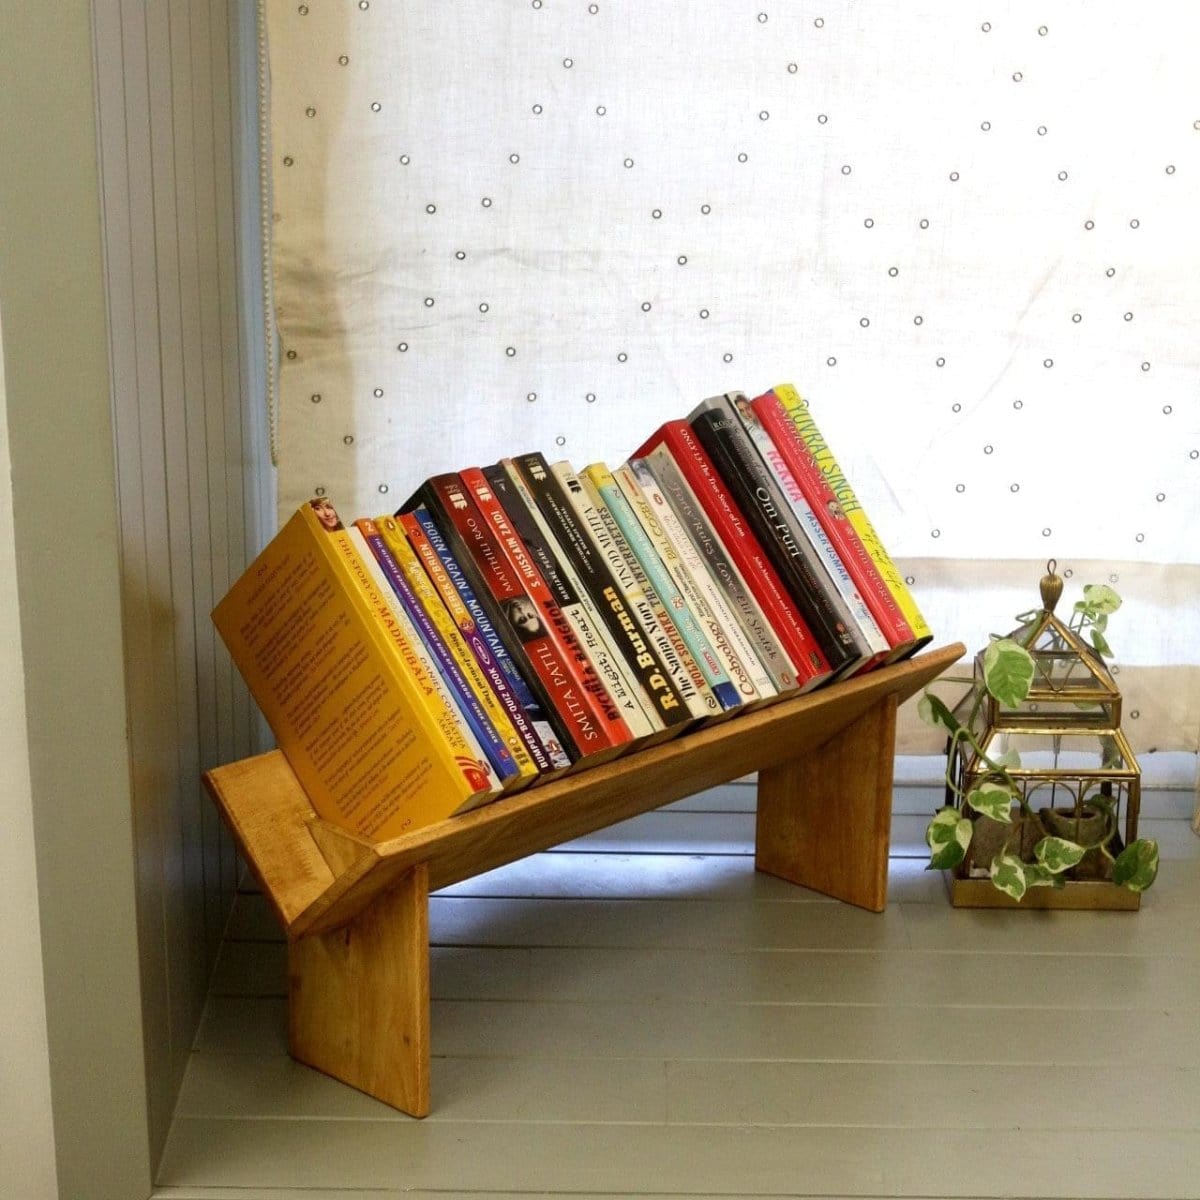 Barish Book Rack (Table Top) Rubberwood BH0016RW Best Home Decor Handcrafted